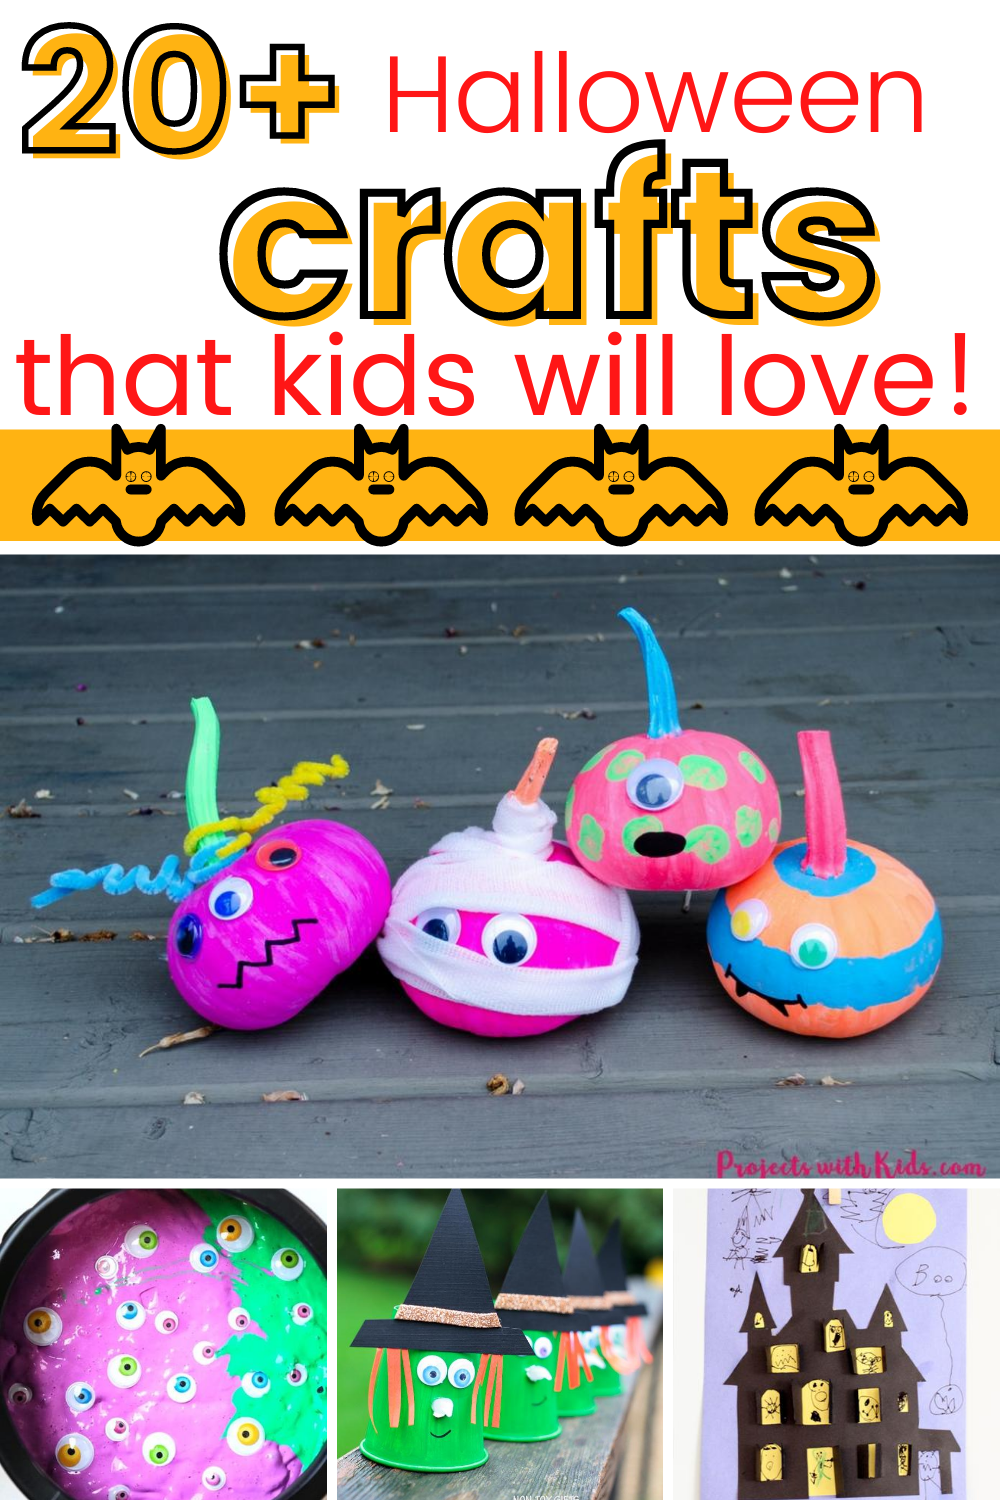 Halloween Crafts for Kids {Over 20} - One Beautiful Home